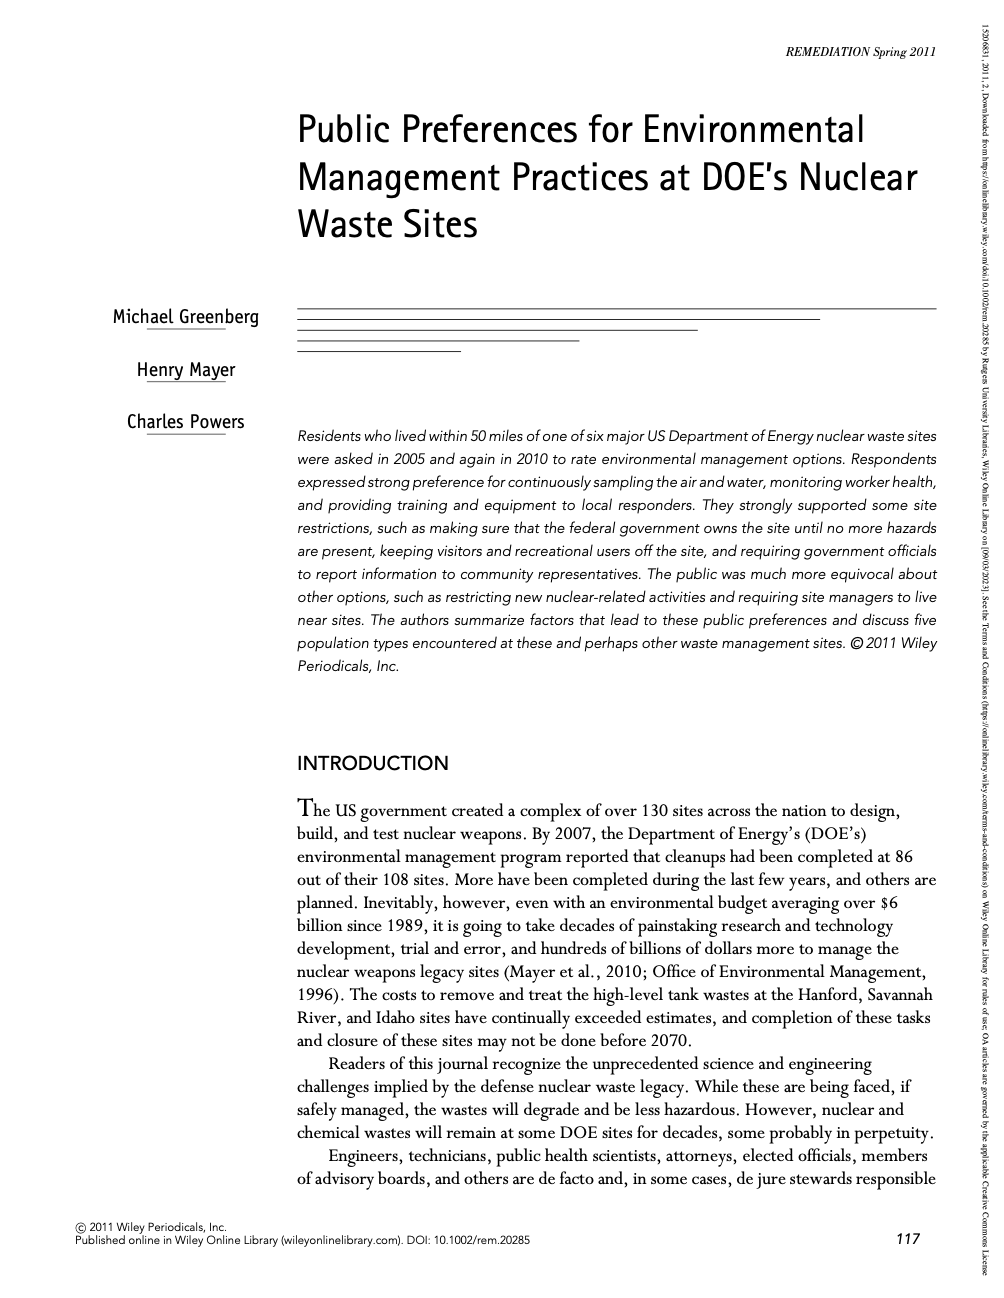 Public preferences for environmental management practices at DOE’s nuclear waste sites.